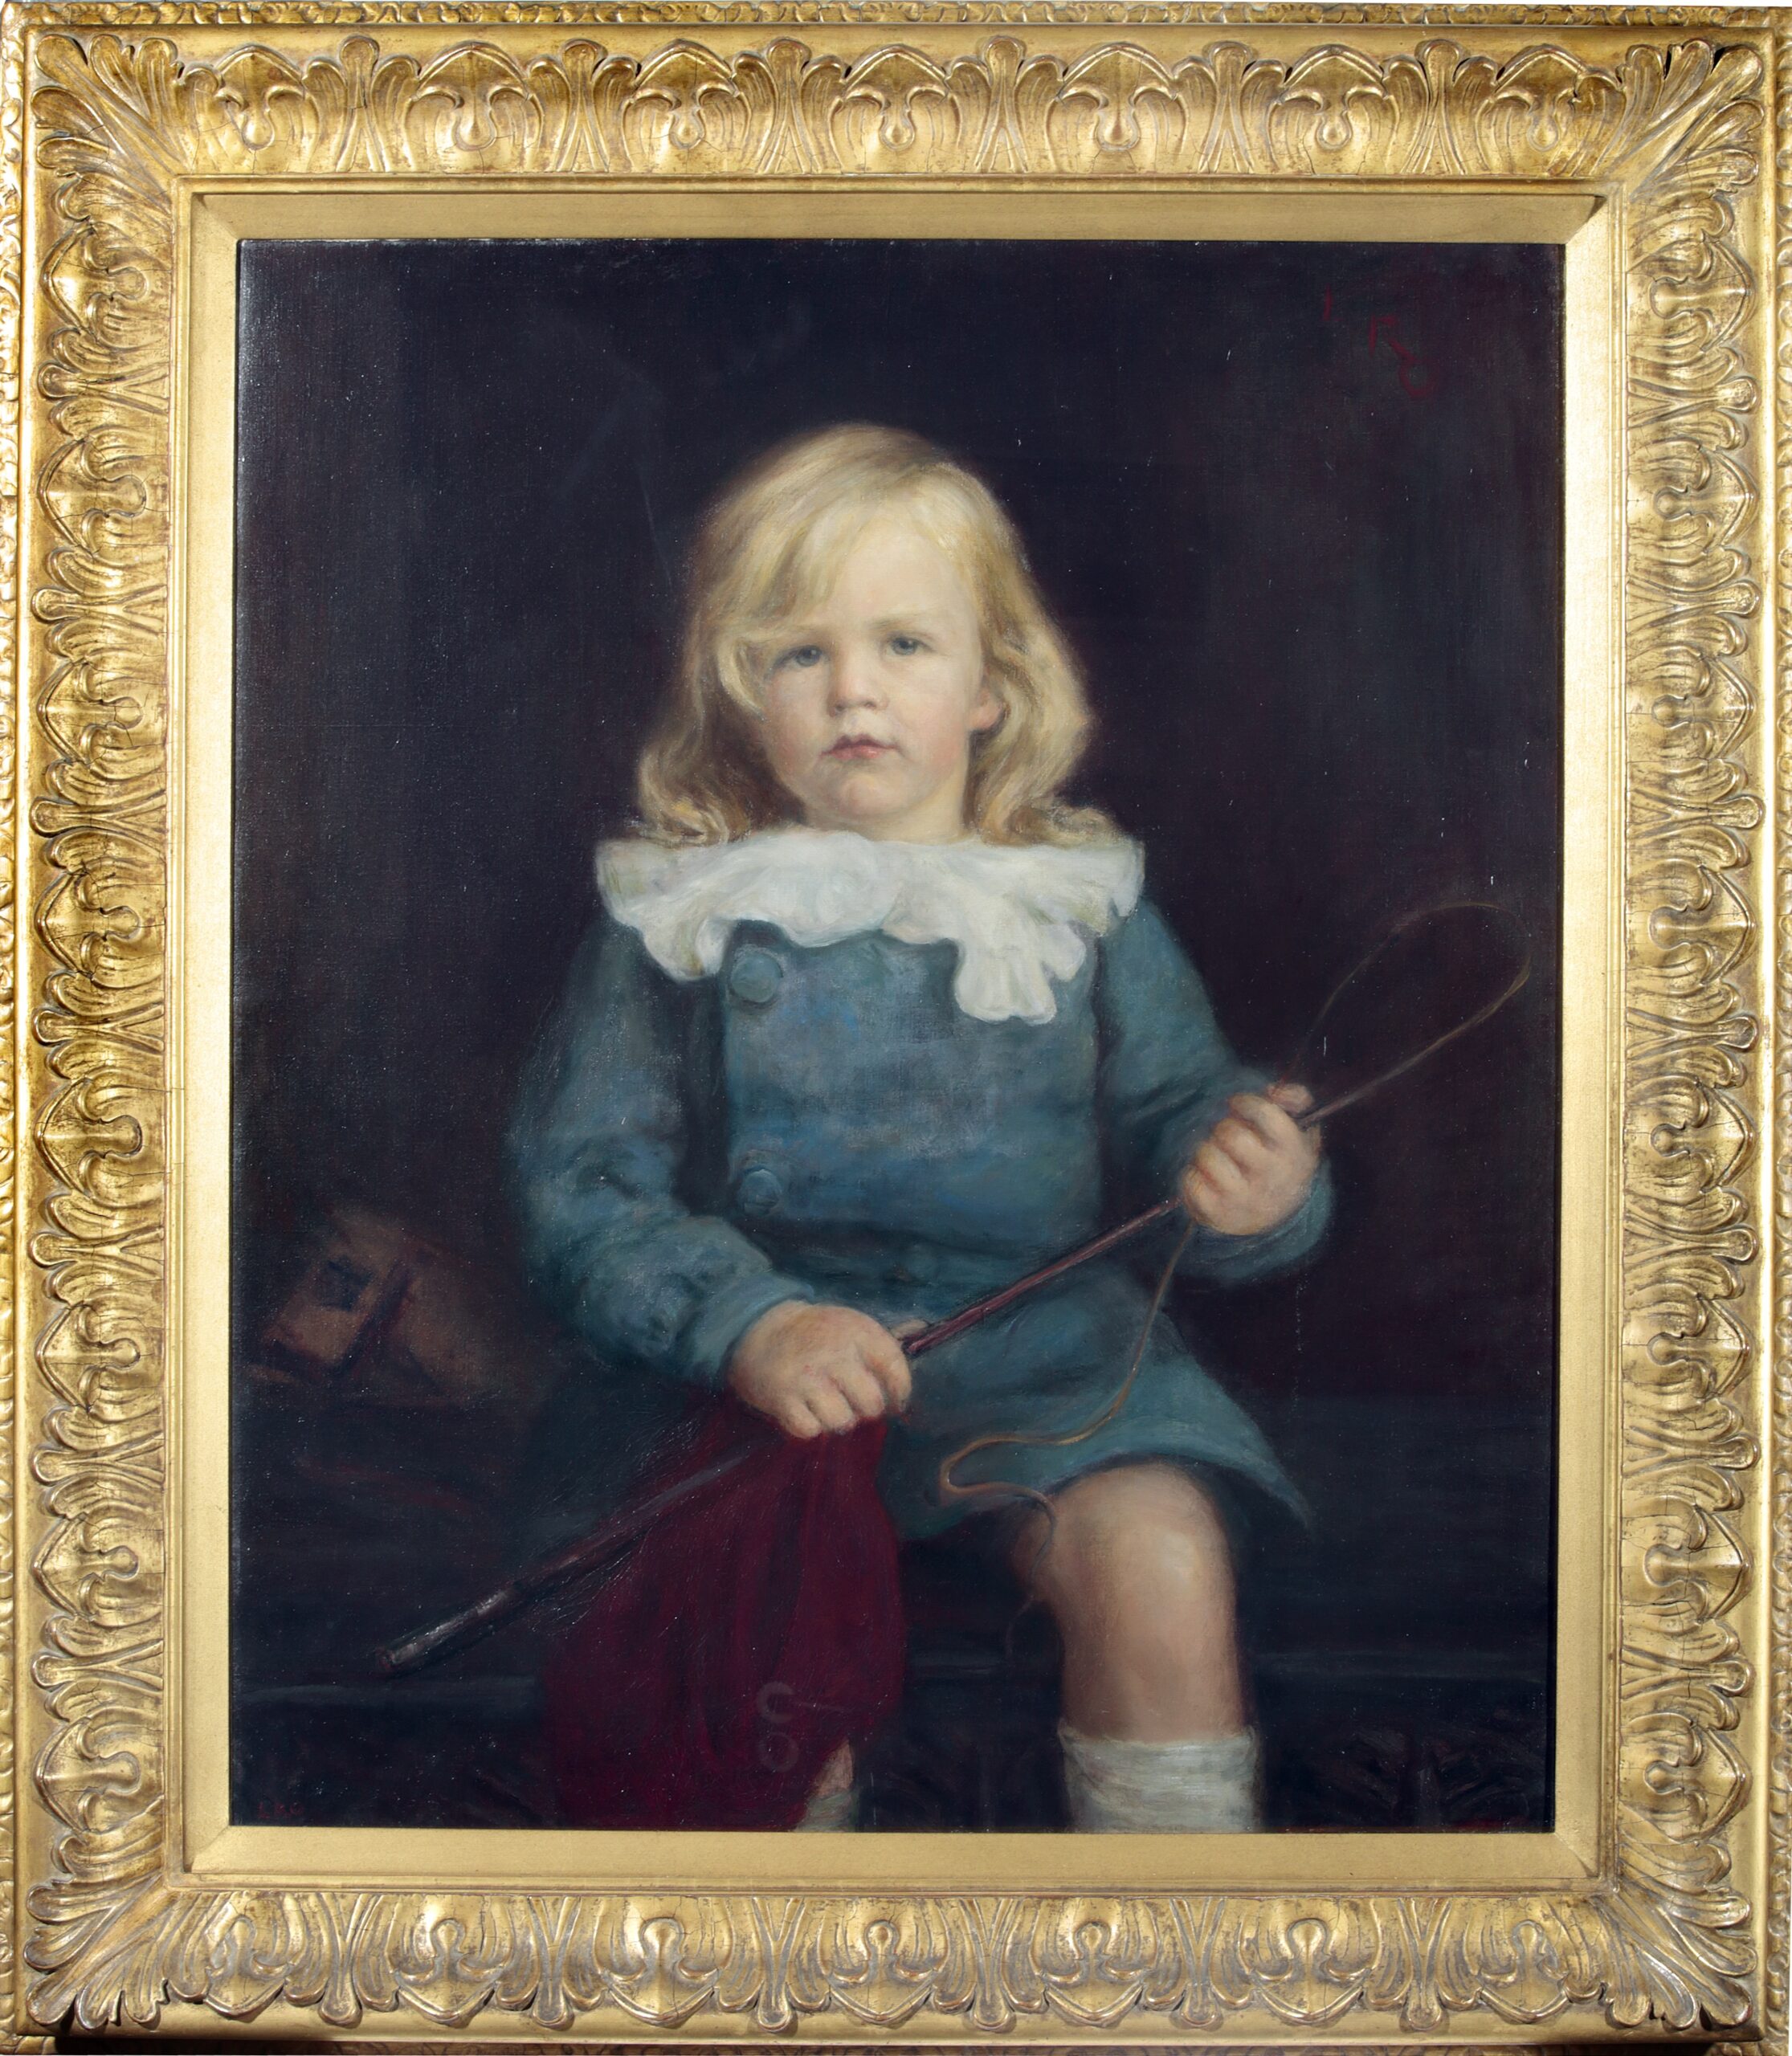 A framed oil painting portrait of Robert John Brooke Gill in 1913, aged 2, shown seated on a wooden chest. Behind him is the head of a toy horse, and he holds a riding whip and a piece of red cloth.